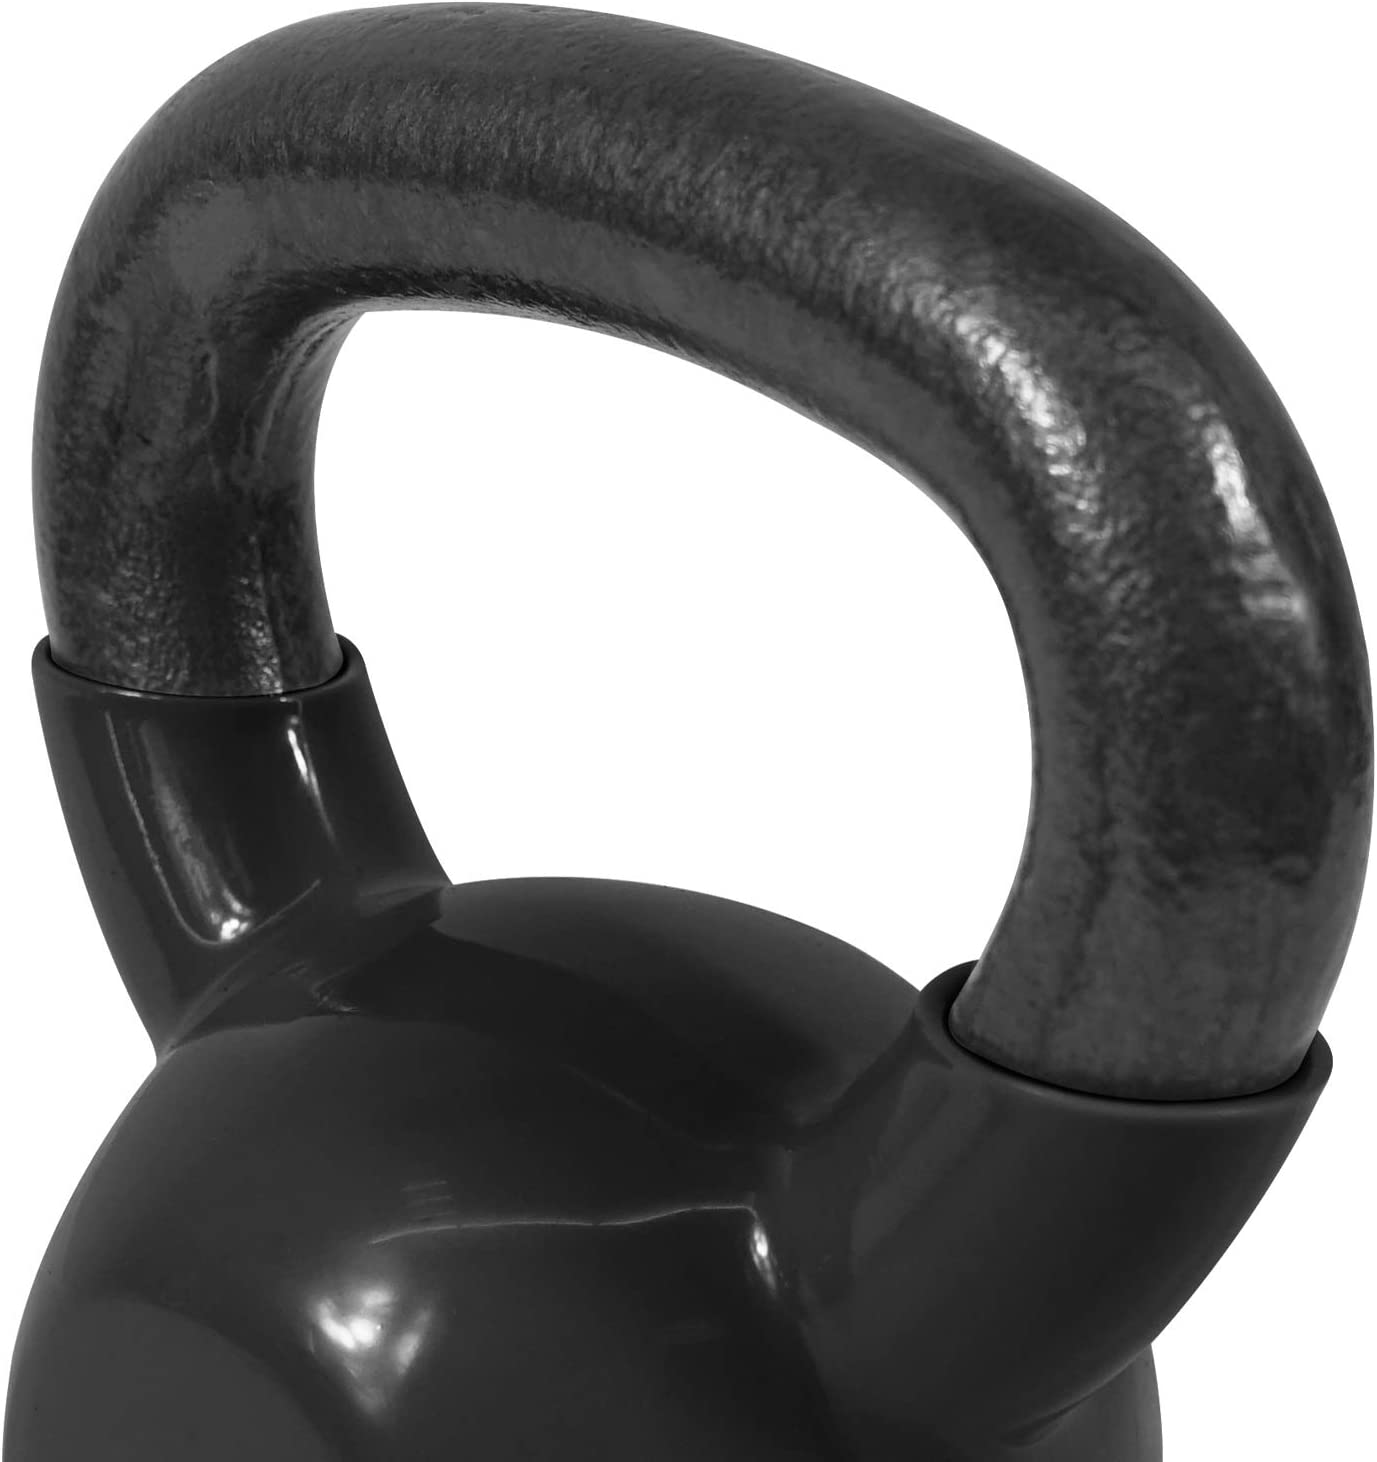 Yes4All 30 lb Vinyl Coated / PVC Kettlebell, Black, Combo / Set, Includes 5-15lb - image 5 of 8